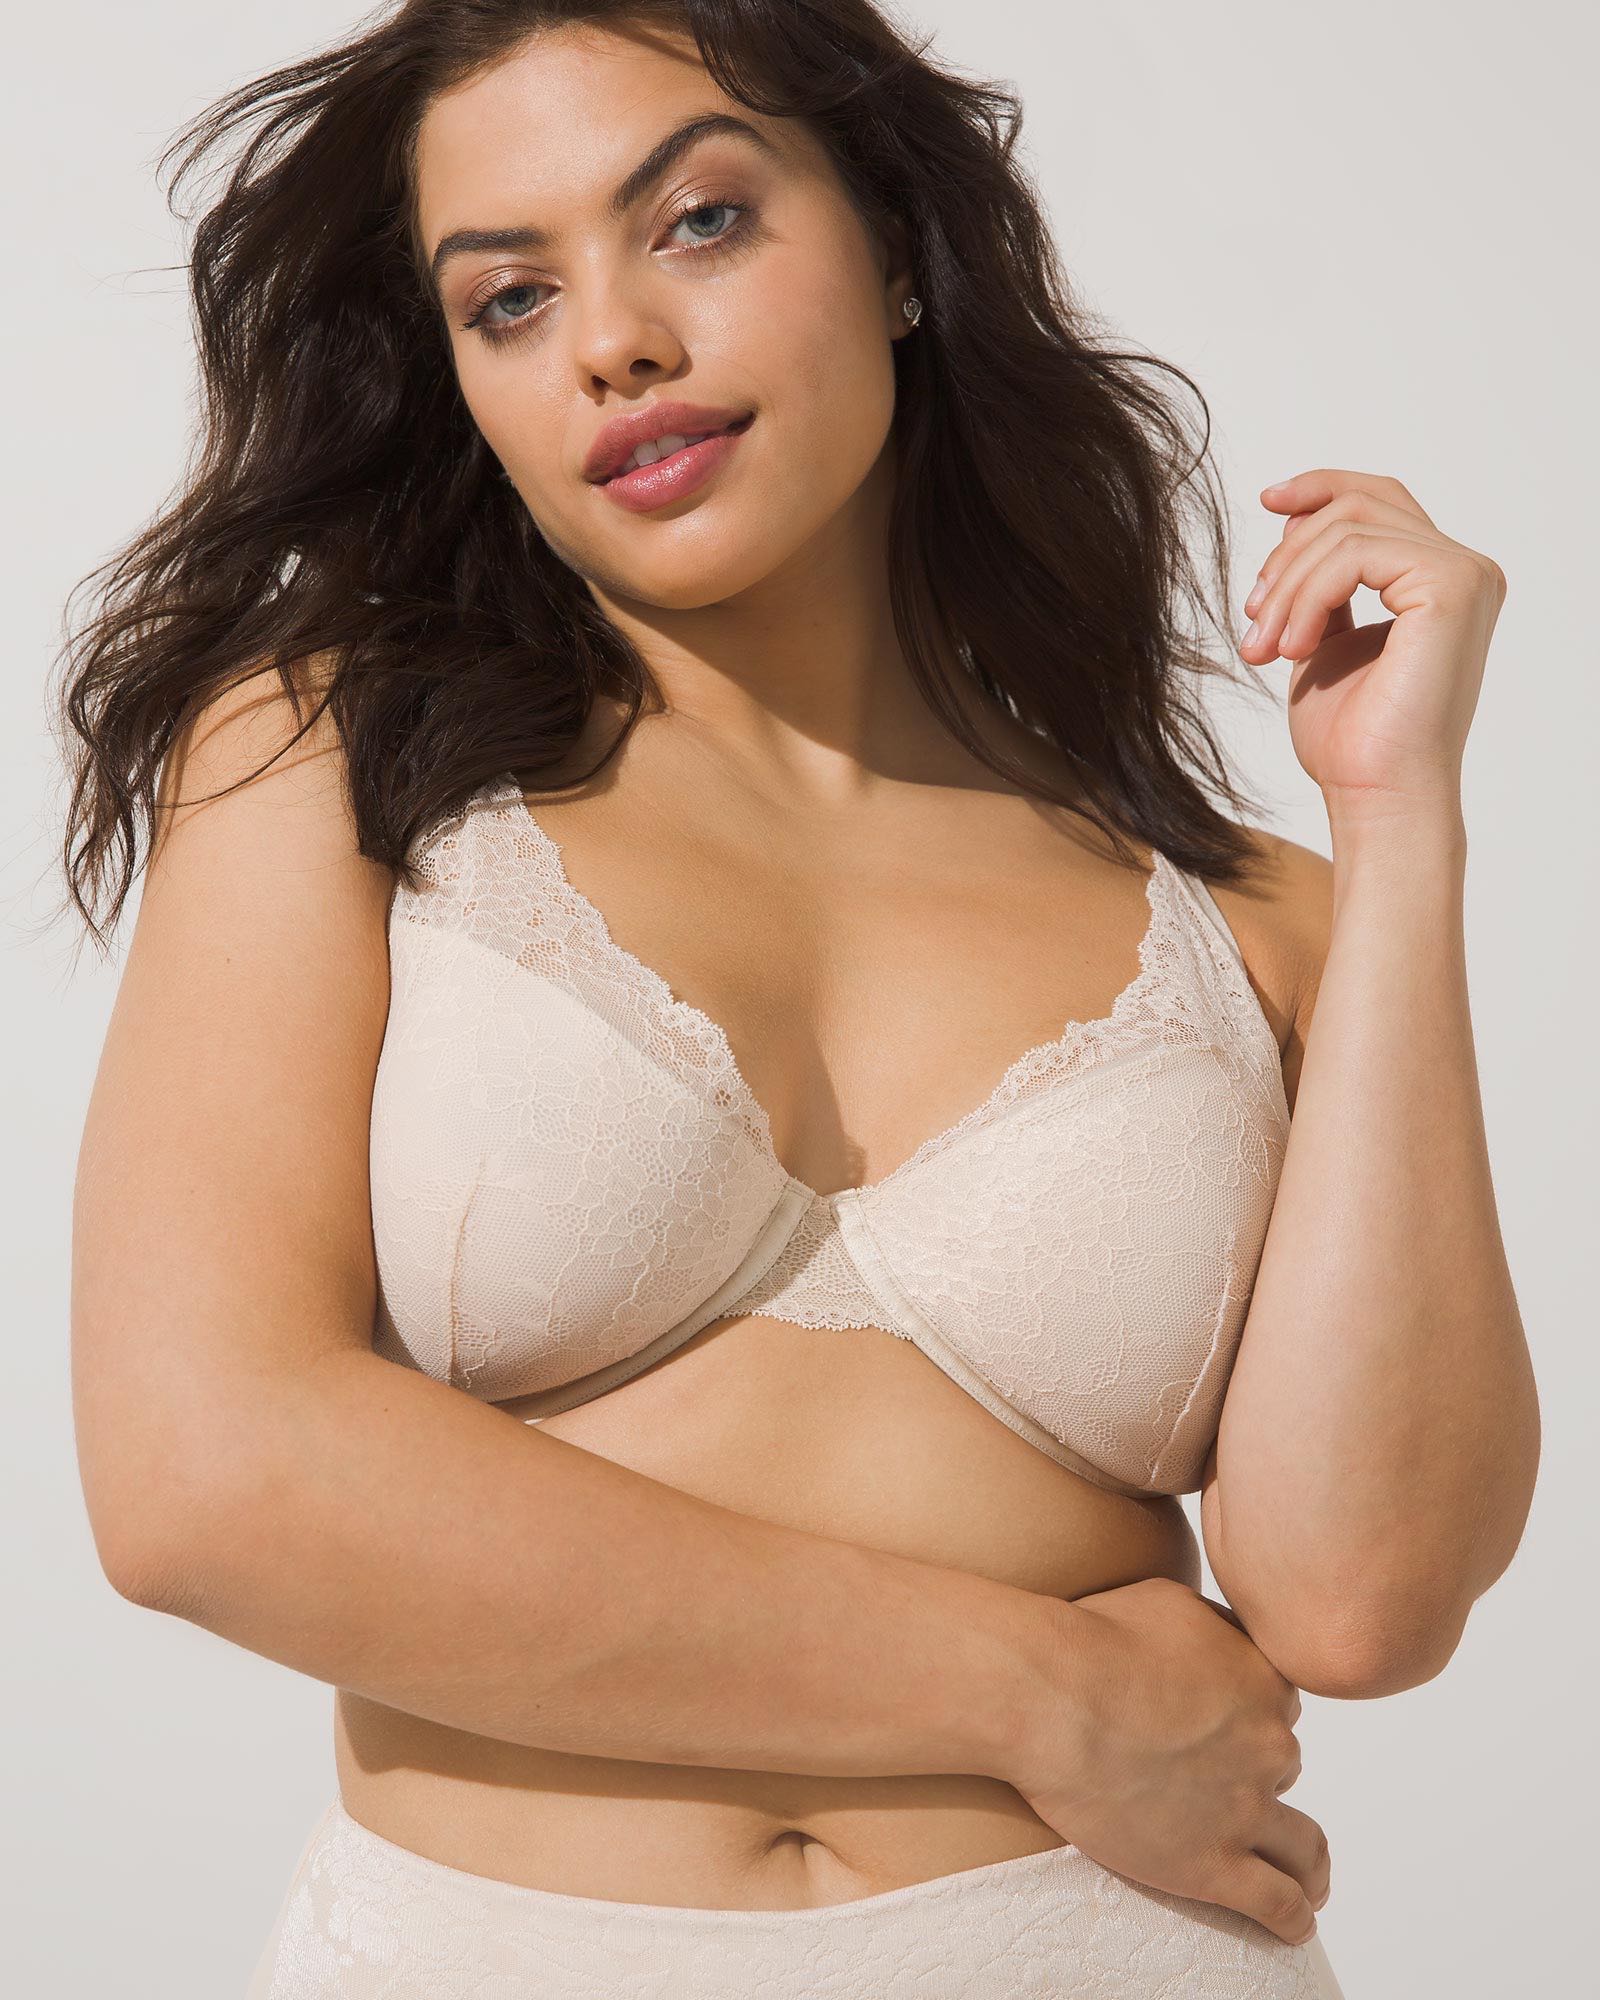 Soma<sup class=st-superscript>®</sup> women’s model wearing an ivory lace plunge bra.